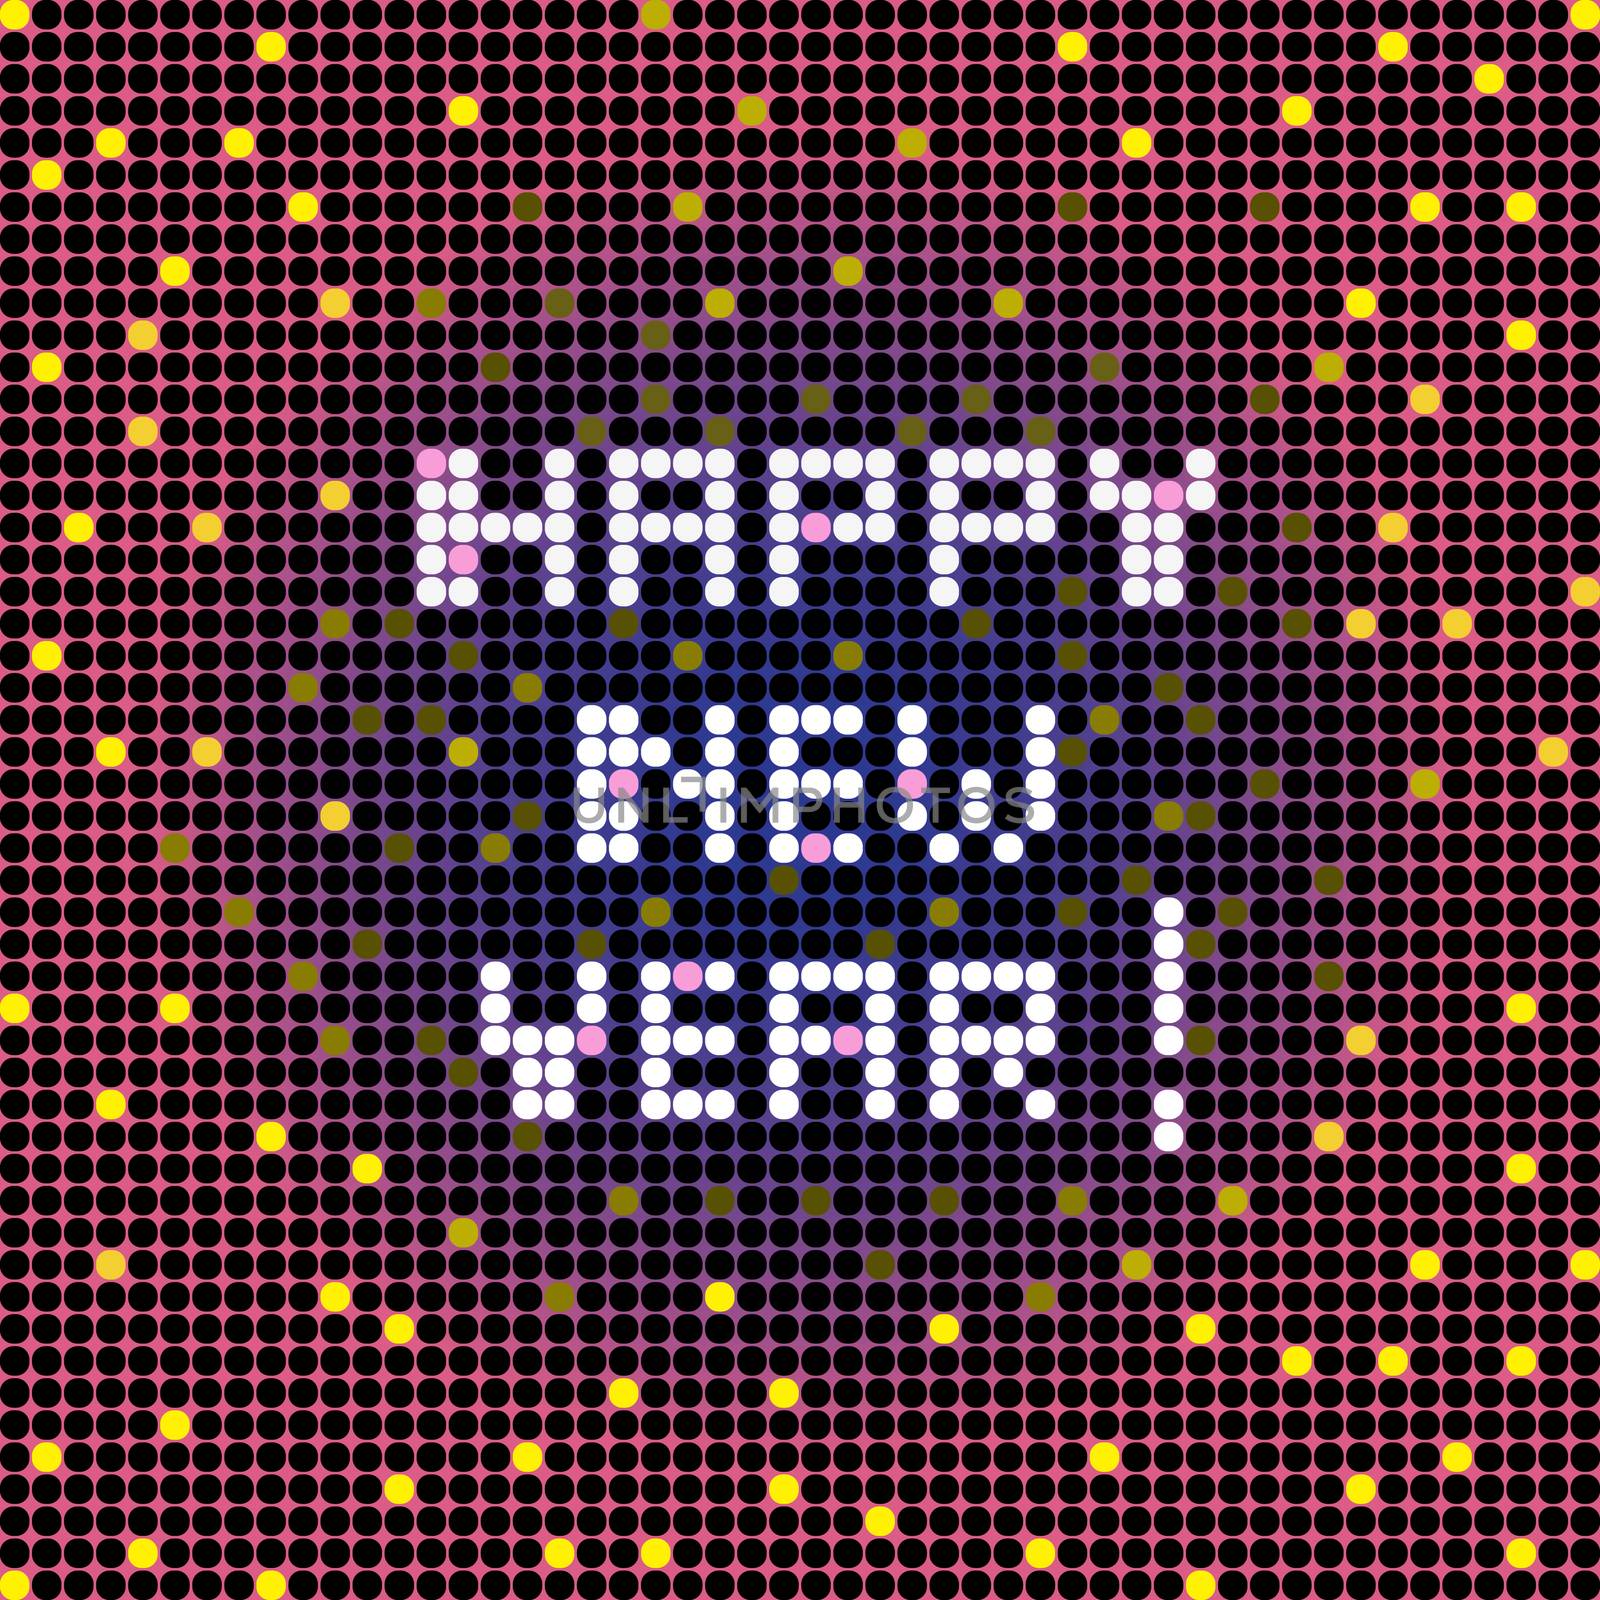 Happy New Year warm greetings card, pixel Pop Art illustration of a scoreboard composition with digital text and confetti